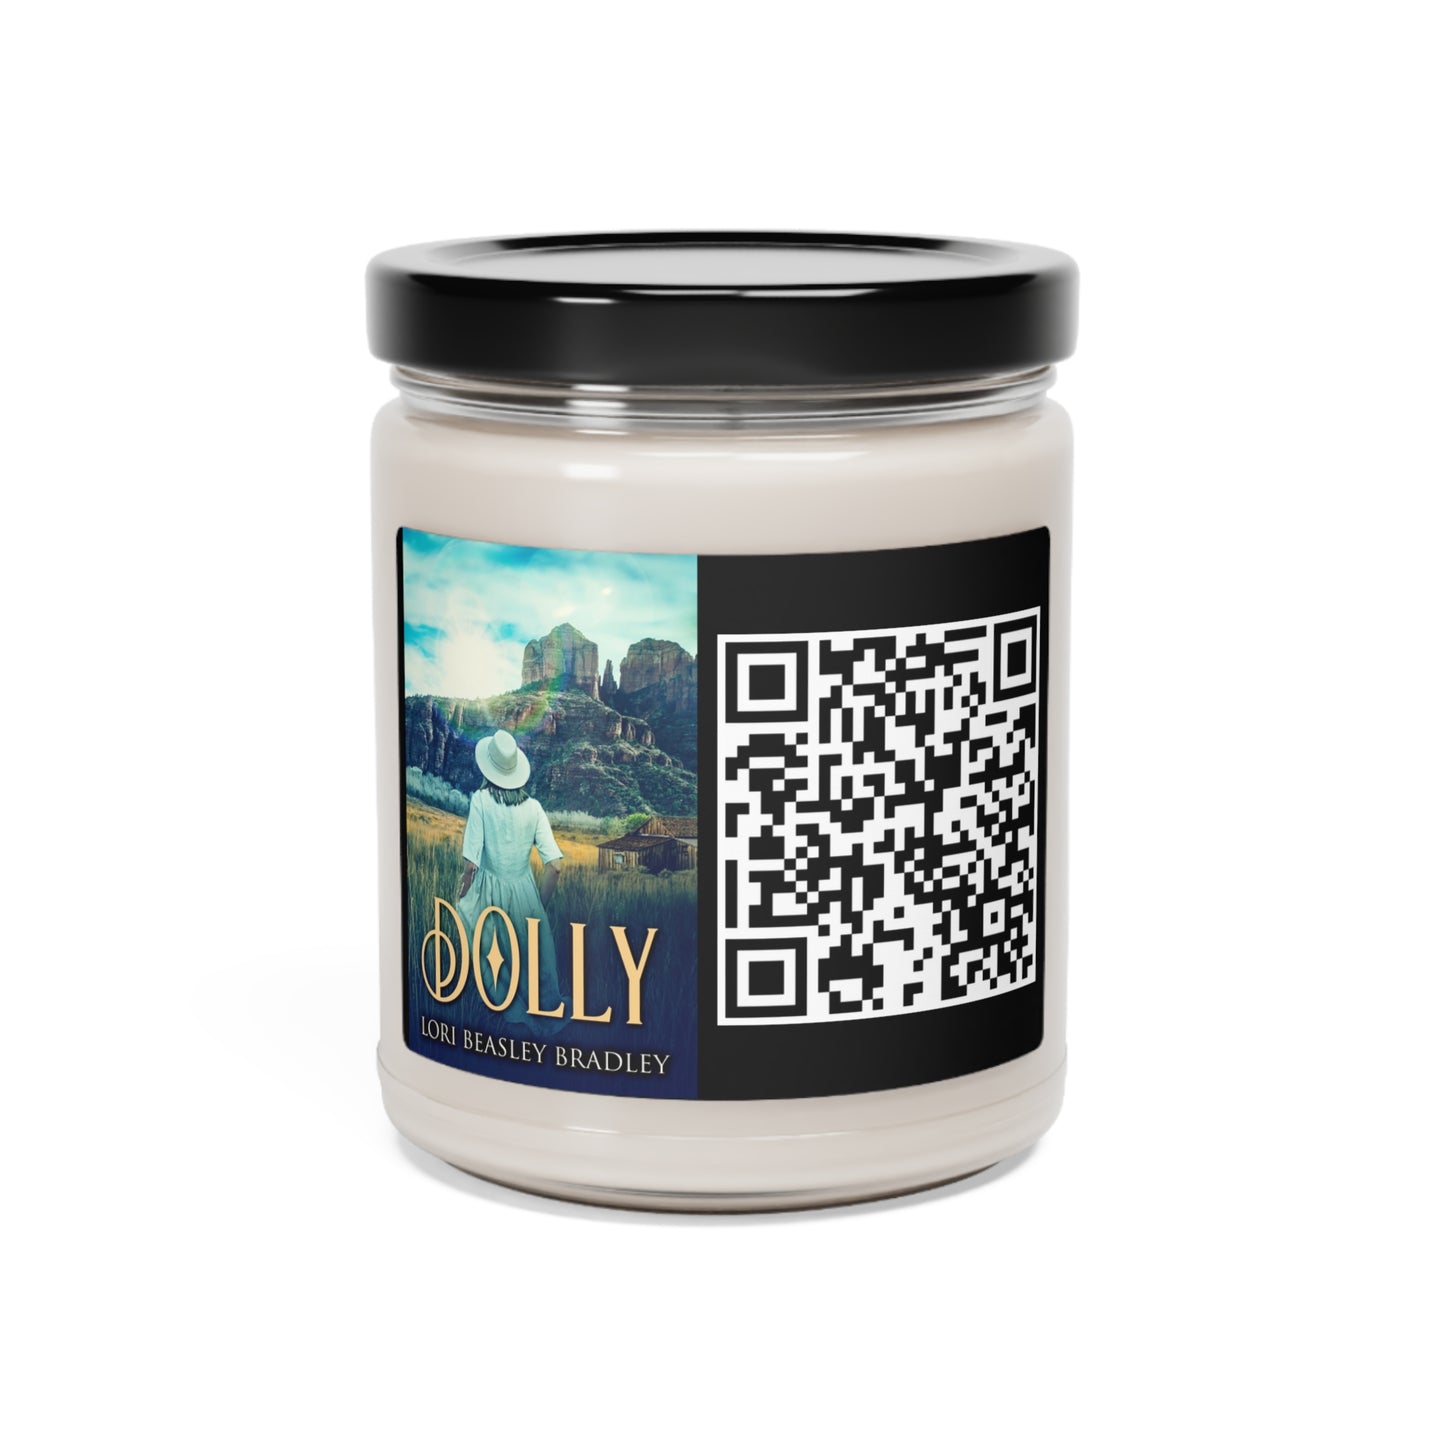 Dolly - Scented Soy Candle